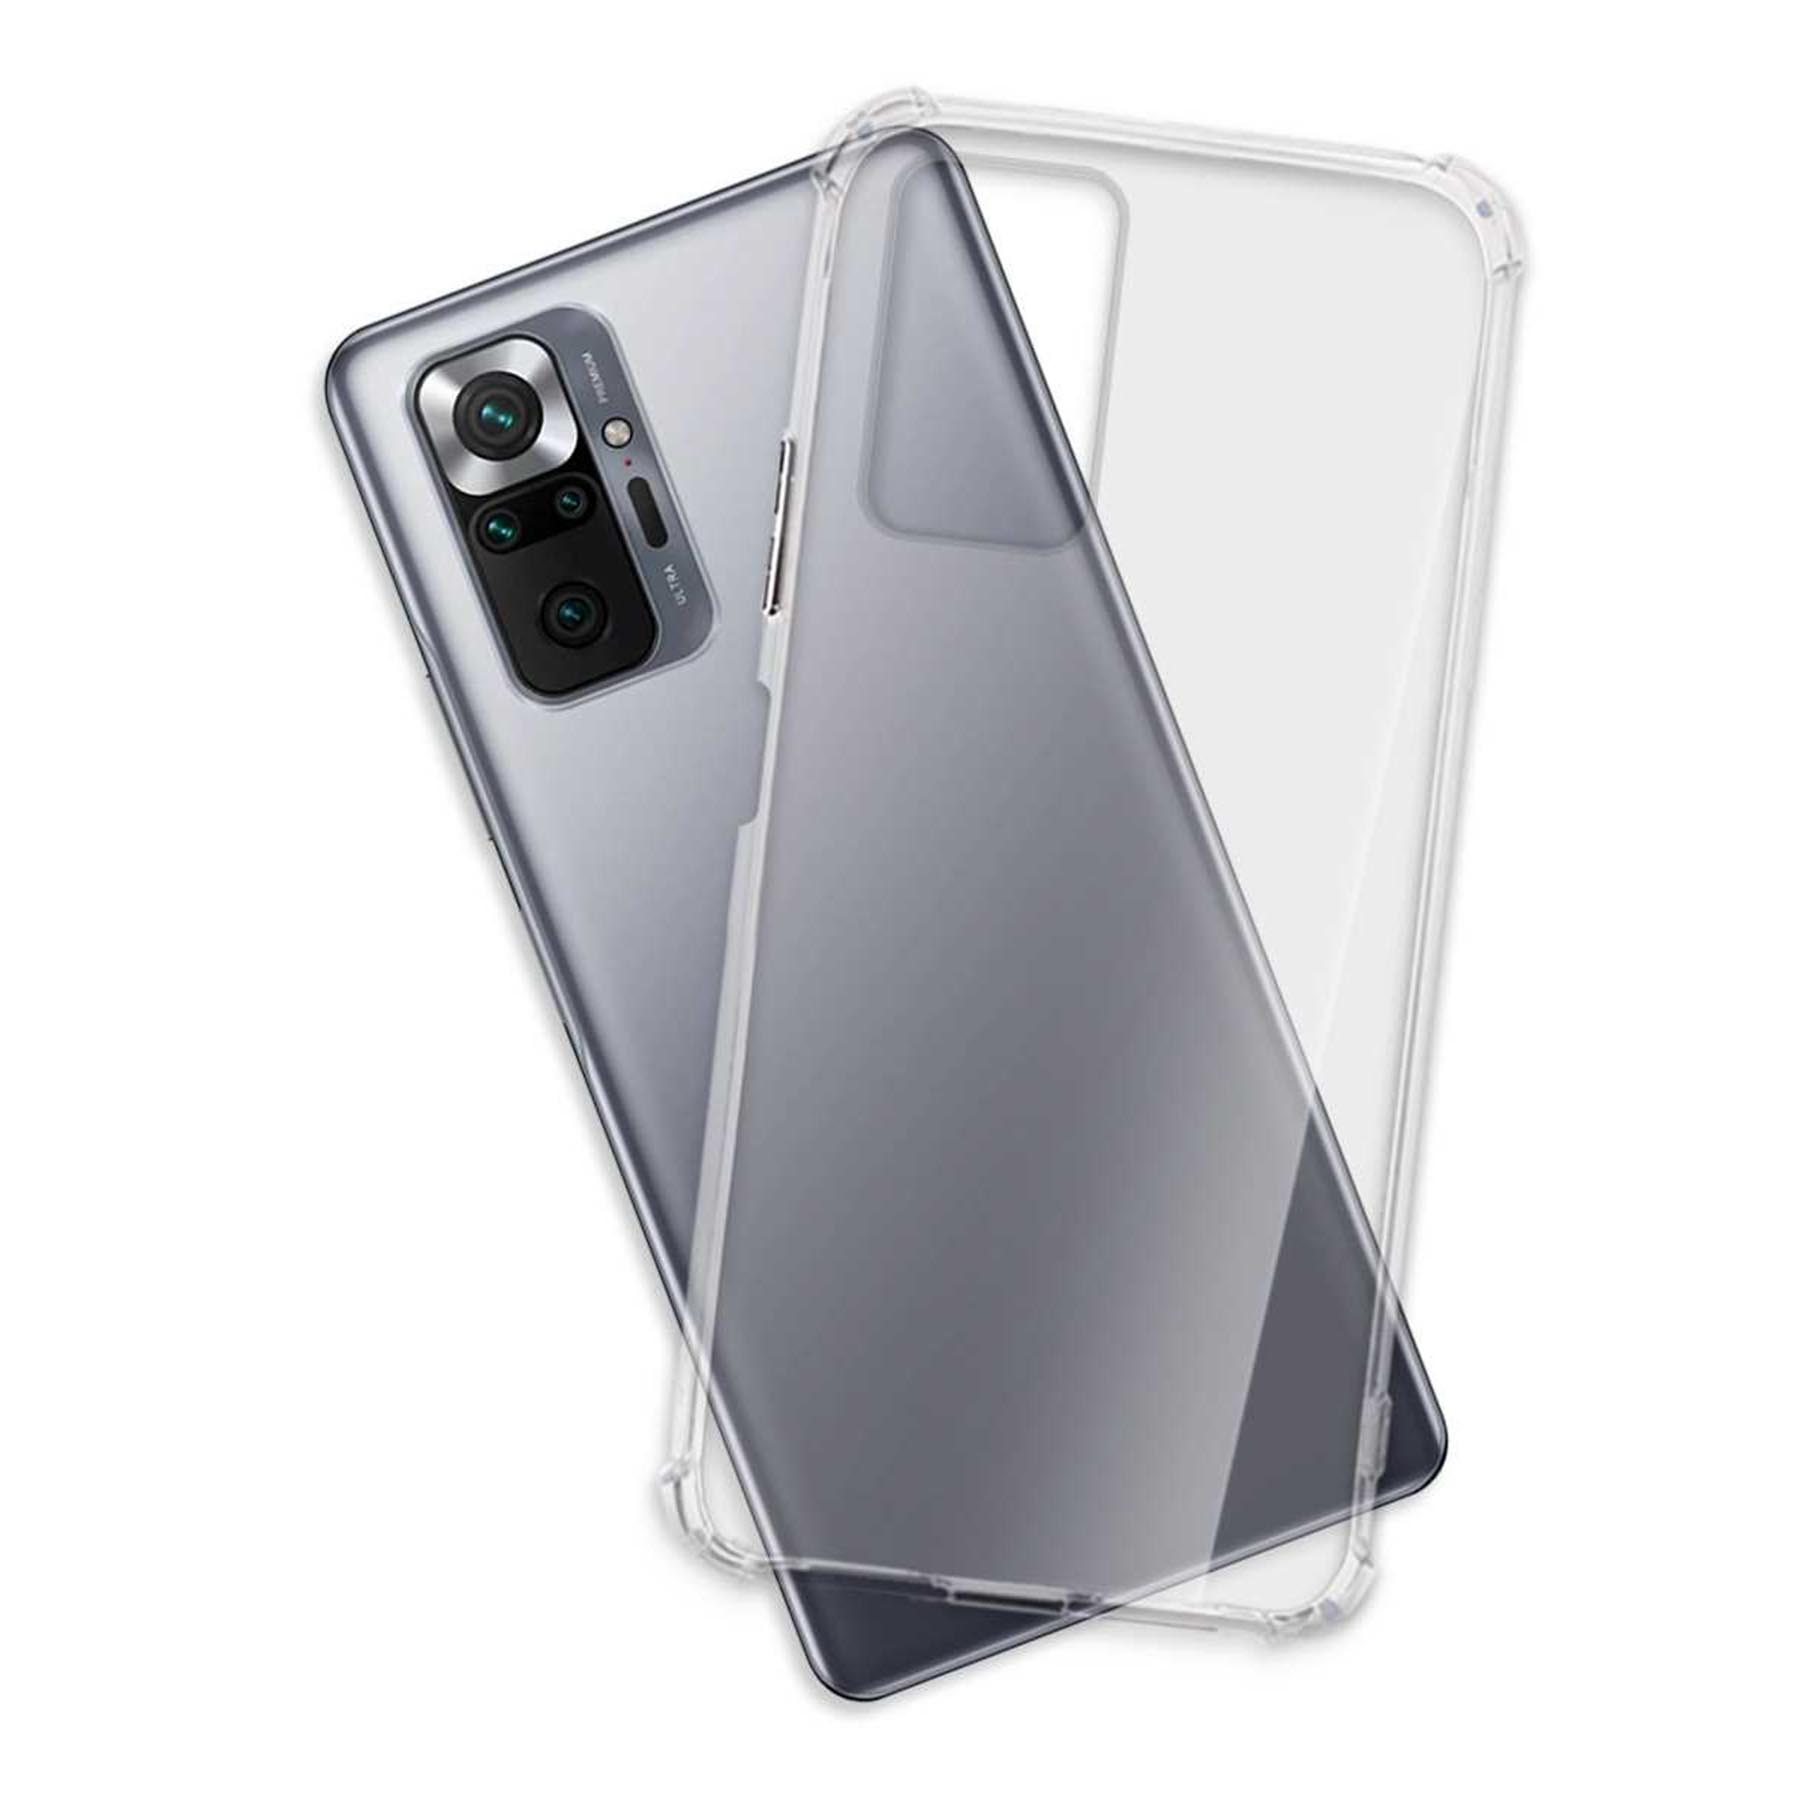 MORE 10 Transparent Backcover, Armor ENERGY 10 Case, Max, Pro, Redmi Pro Note Clear Note MTB Xiaomi,